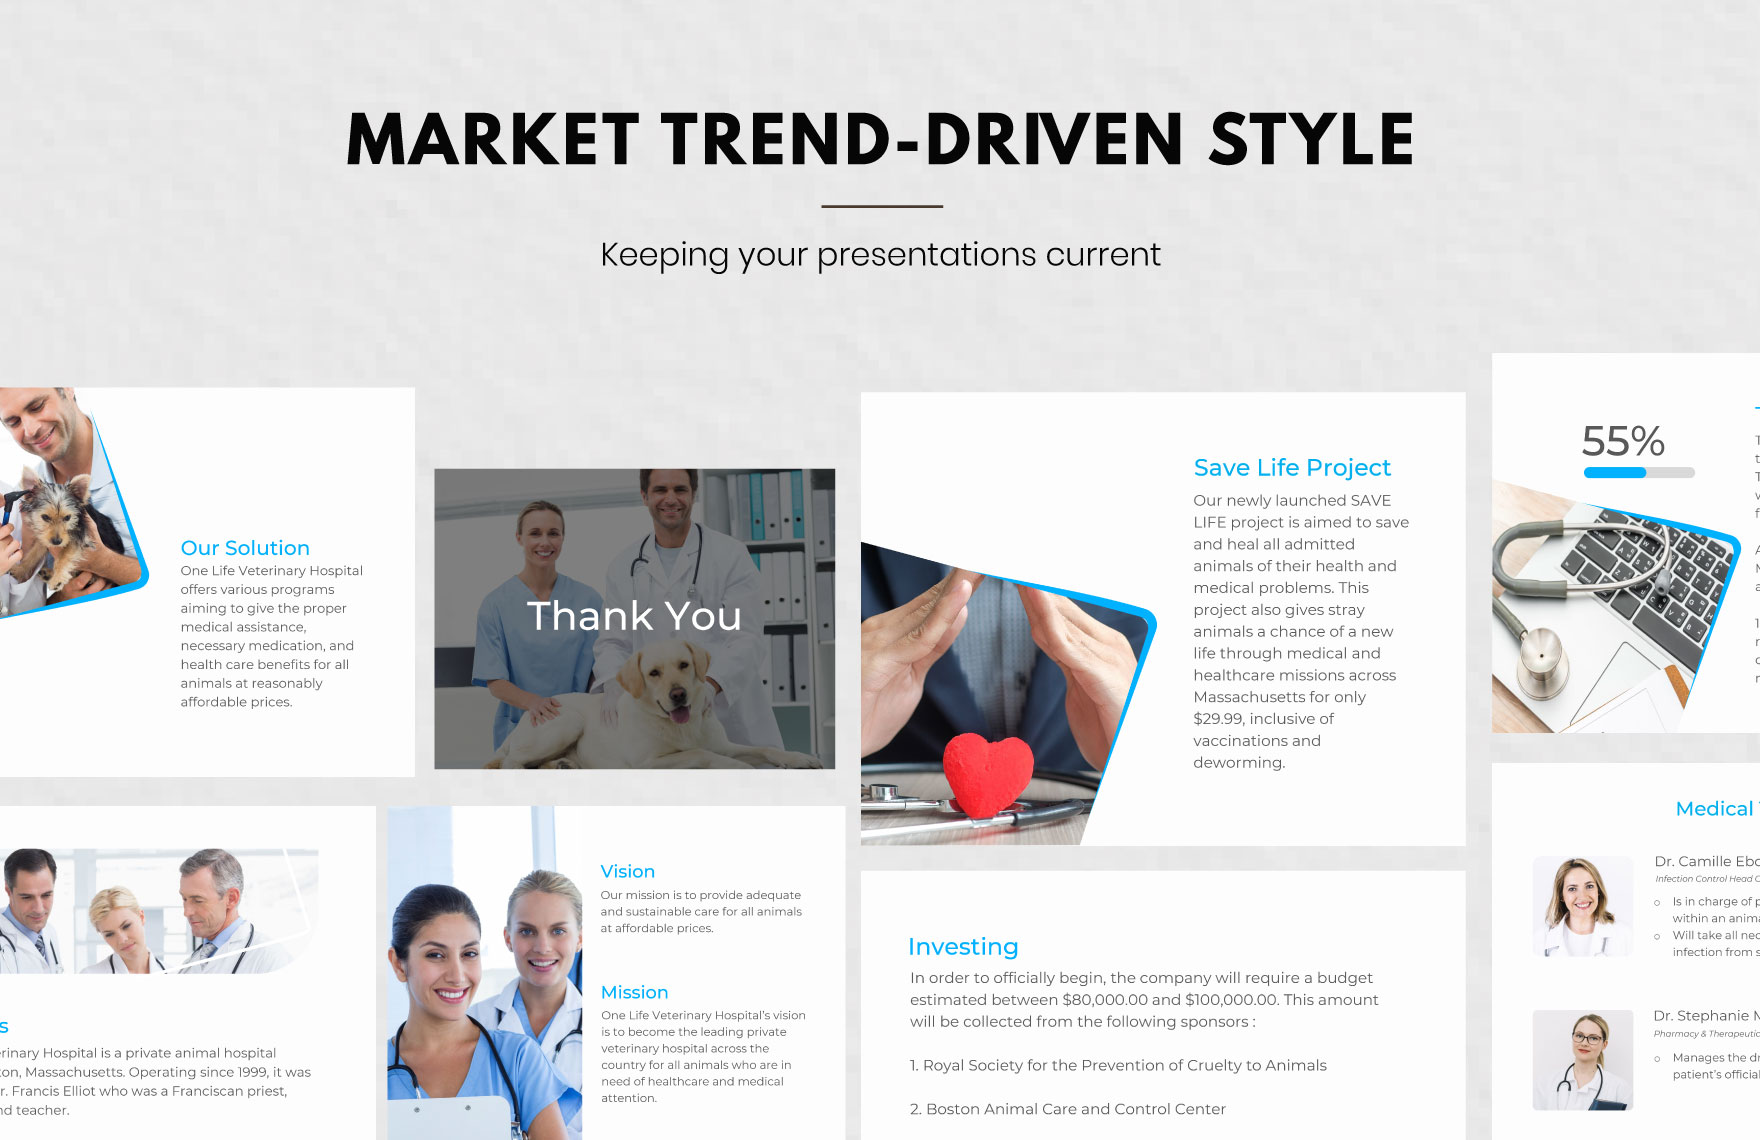 Medical Pitch Deck Template